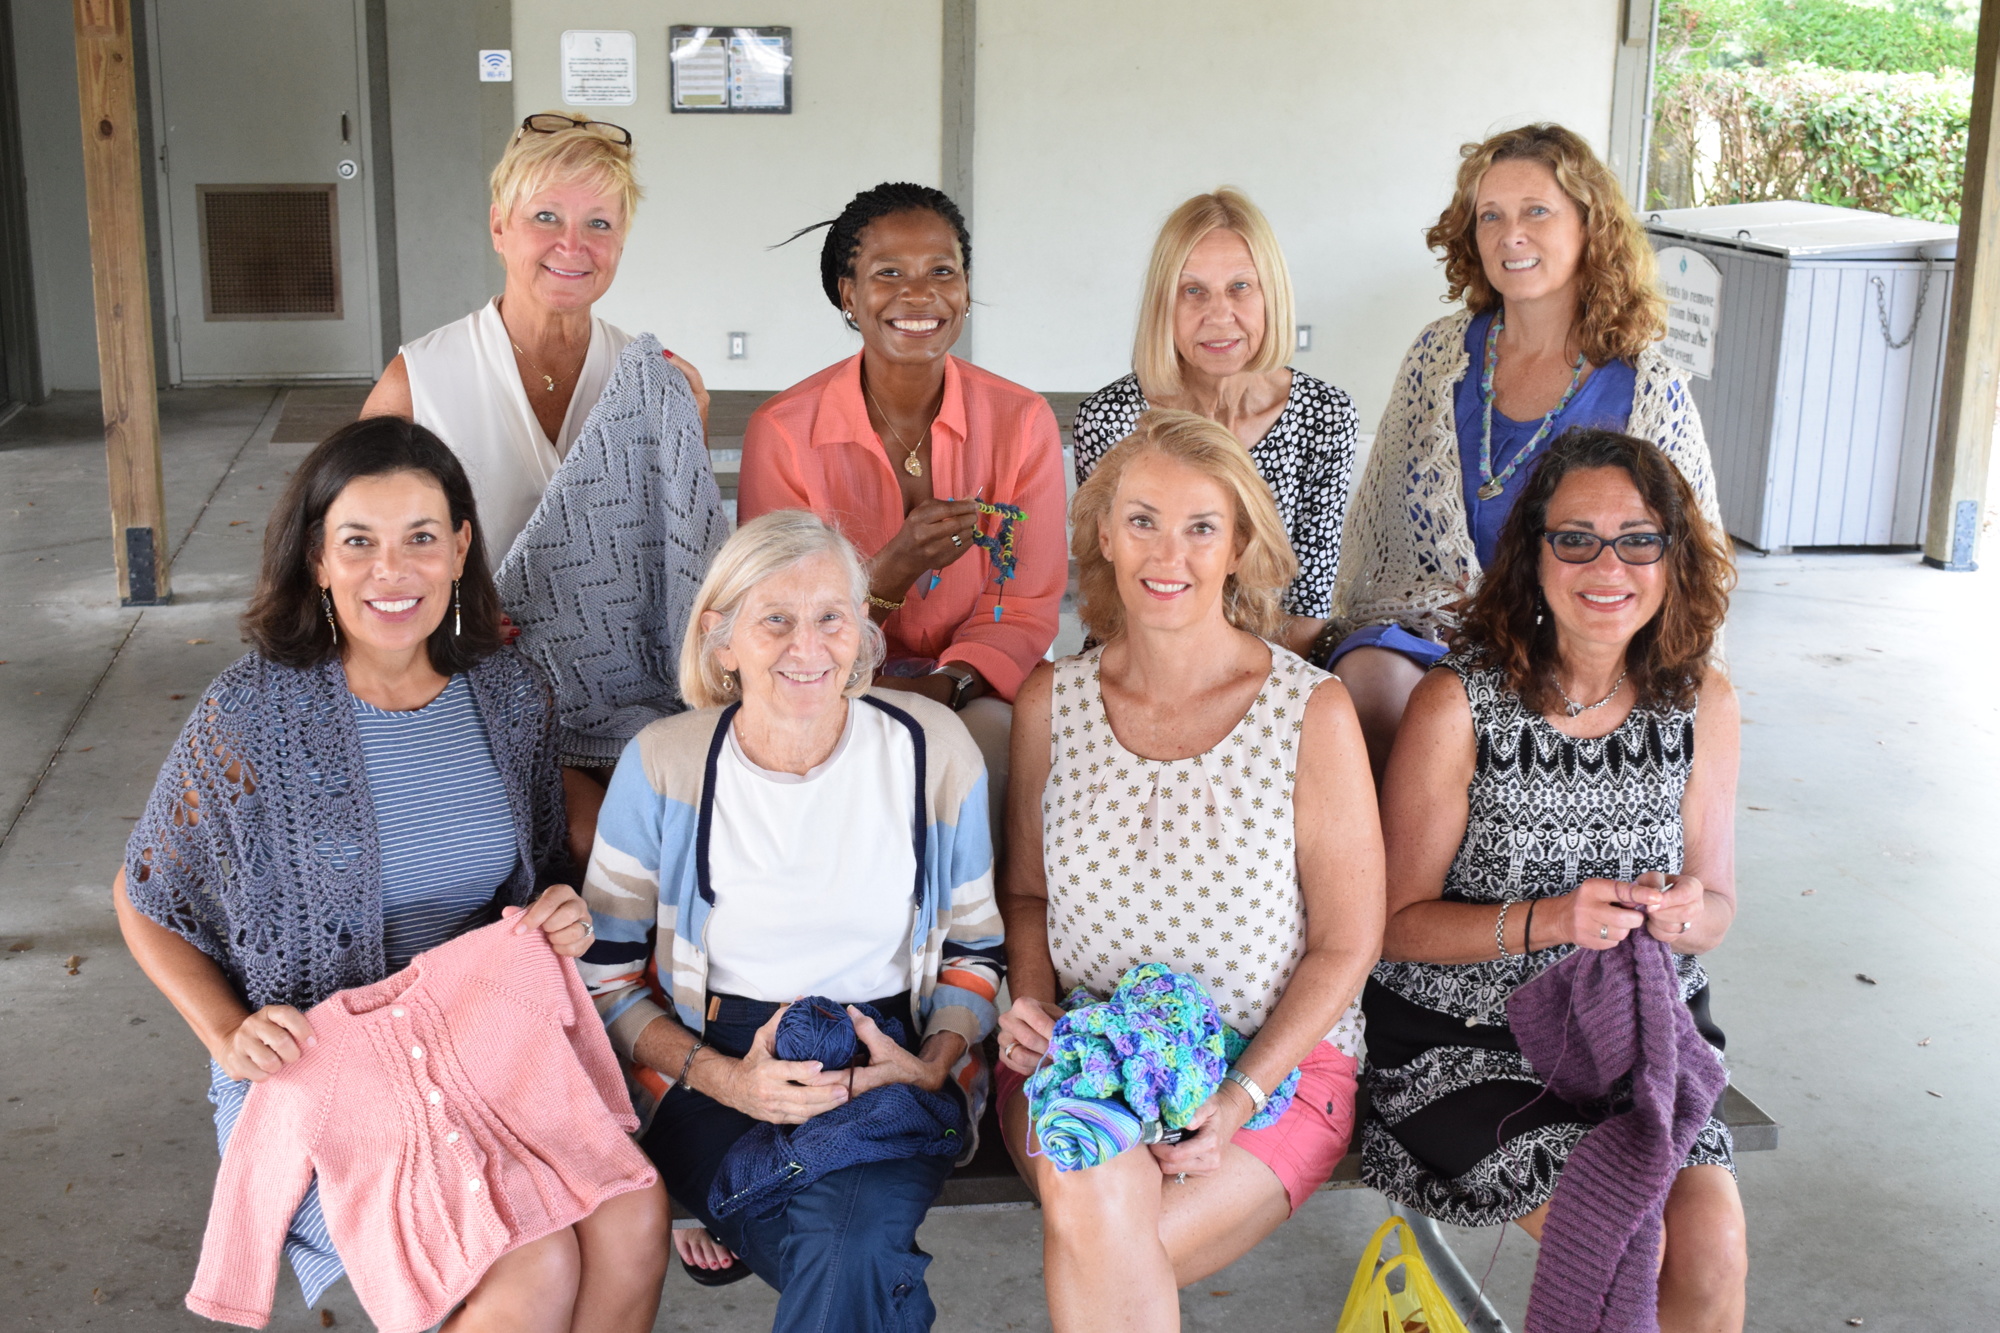 East County's (back) Nancy Skibinski, Shelly Hopkins, Cindy Wasko, Laurie Riehn, (front) Jo Jadin, Laurie Rosfeld, Kathy Wright and Sarah Montemarano gather at Greenbrook Adventure Park to knit while socializing.